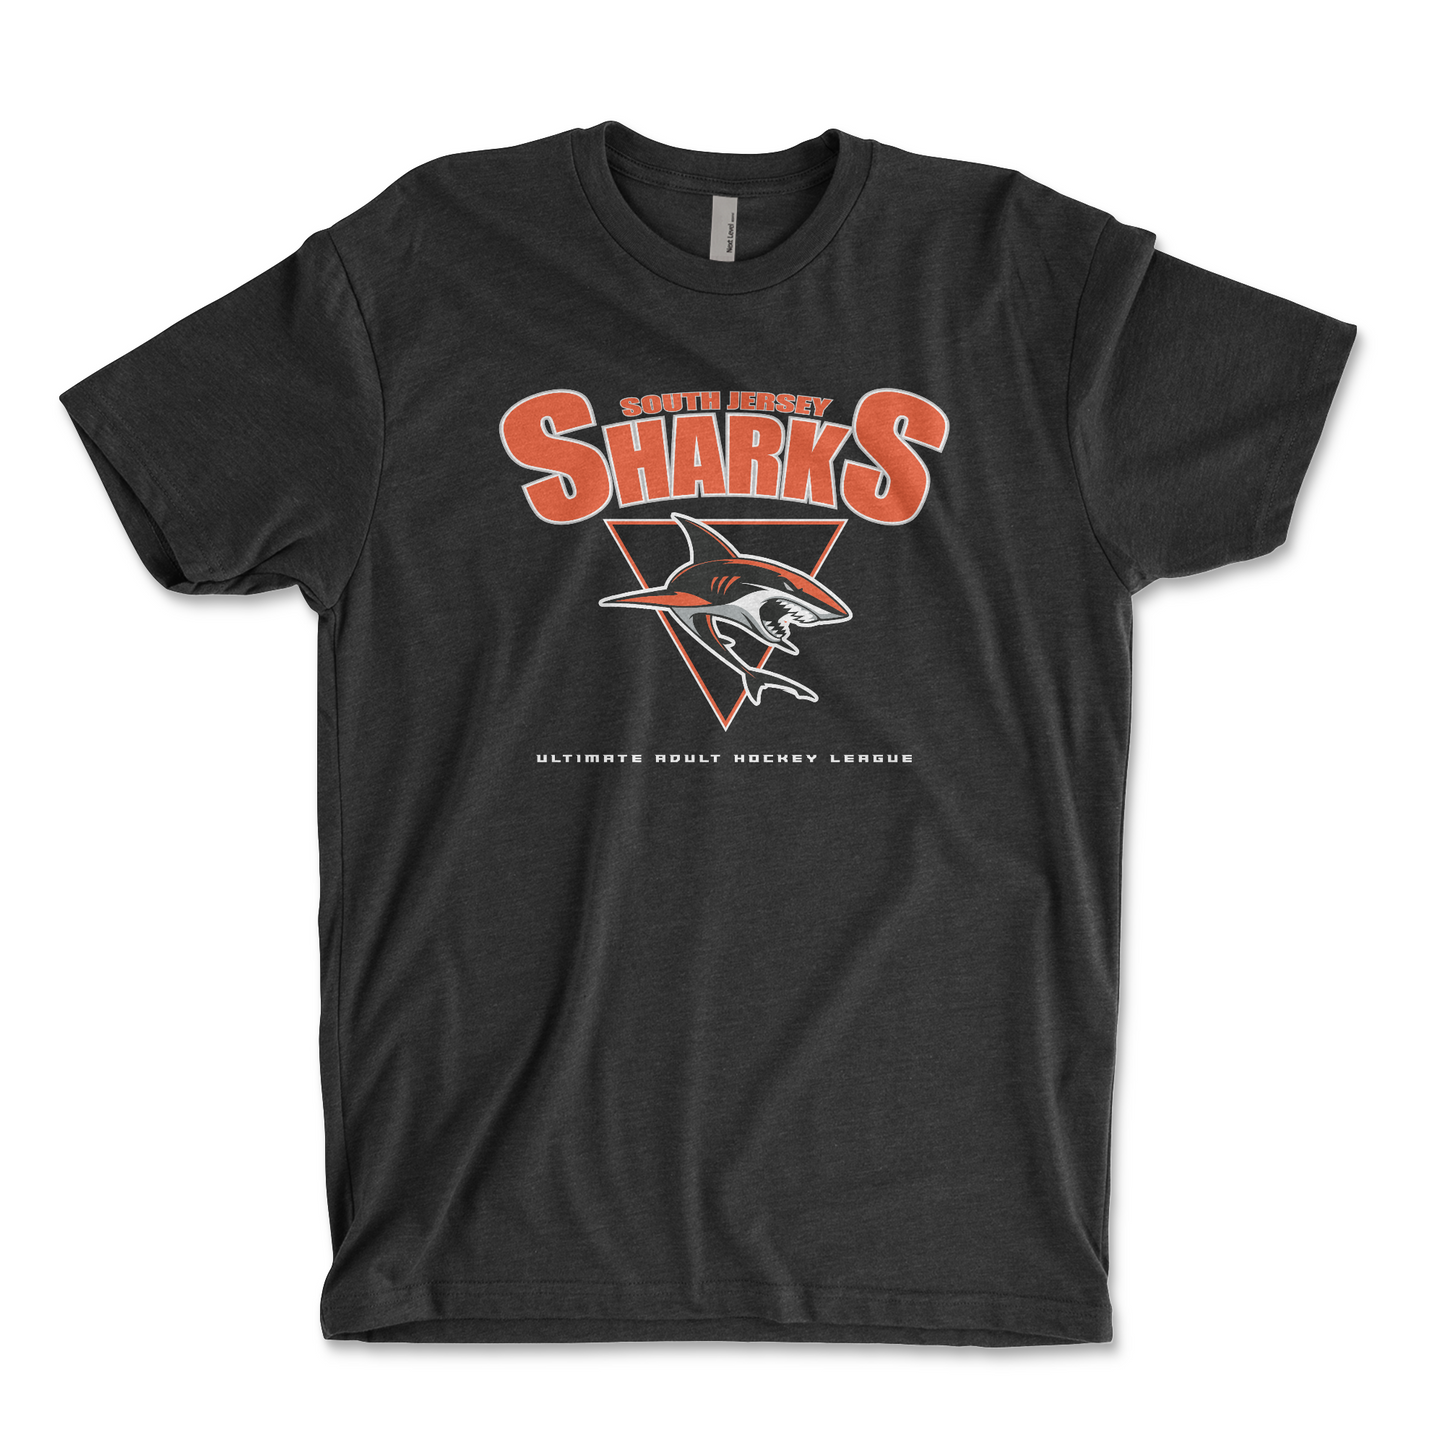 Retro 90's Series - South Jersey Sharks